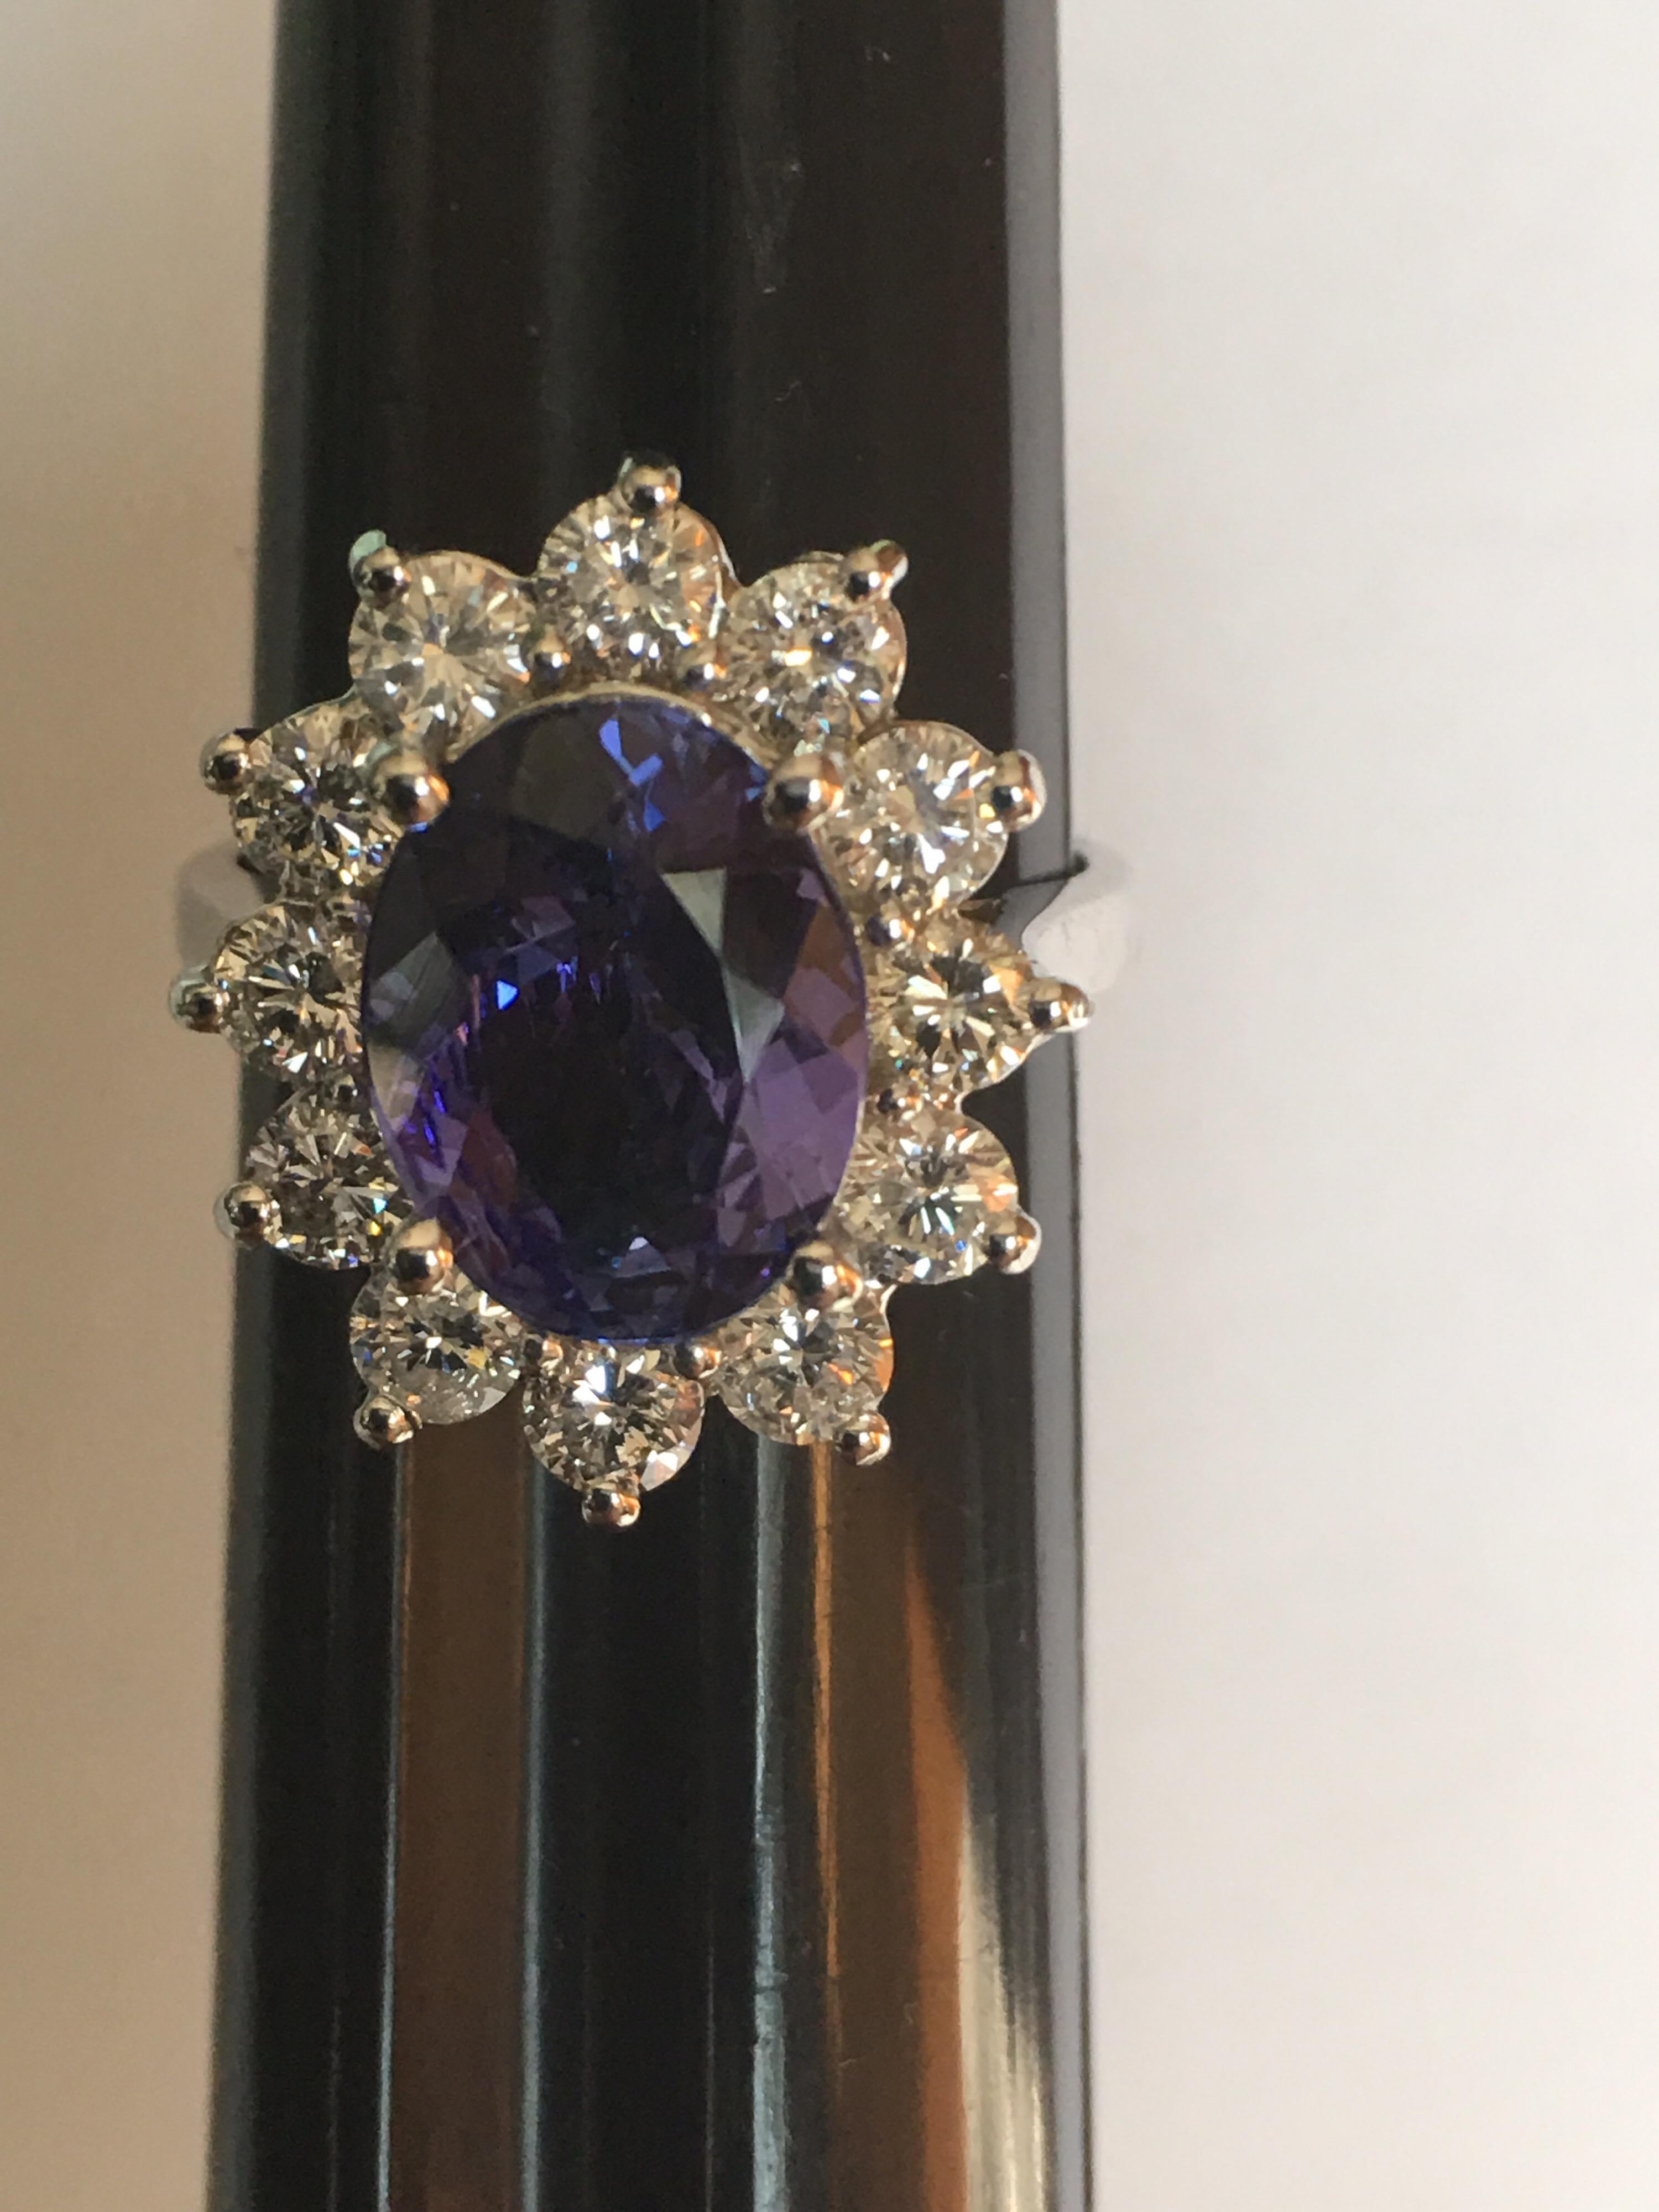 Tanzanite and  Diamonds ring is one of a kind. Size of the Tanzanite is 9mm X 11mm. Diamonds quality is VVS1 and  Color is D. The Ring is set on 14 Karat white gold. Now size of the ring is 6.5 .You can resize the ring if needed. Total weight of